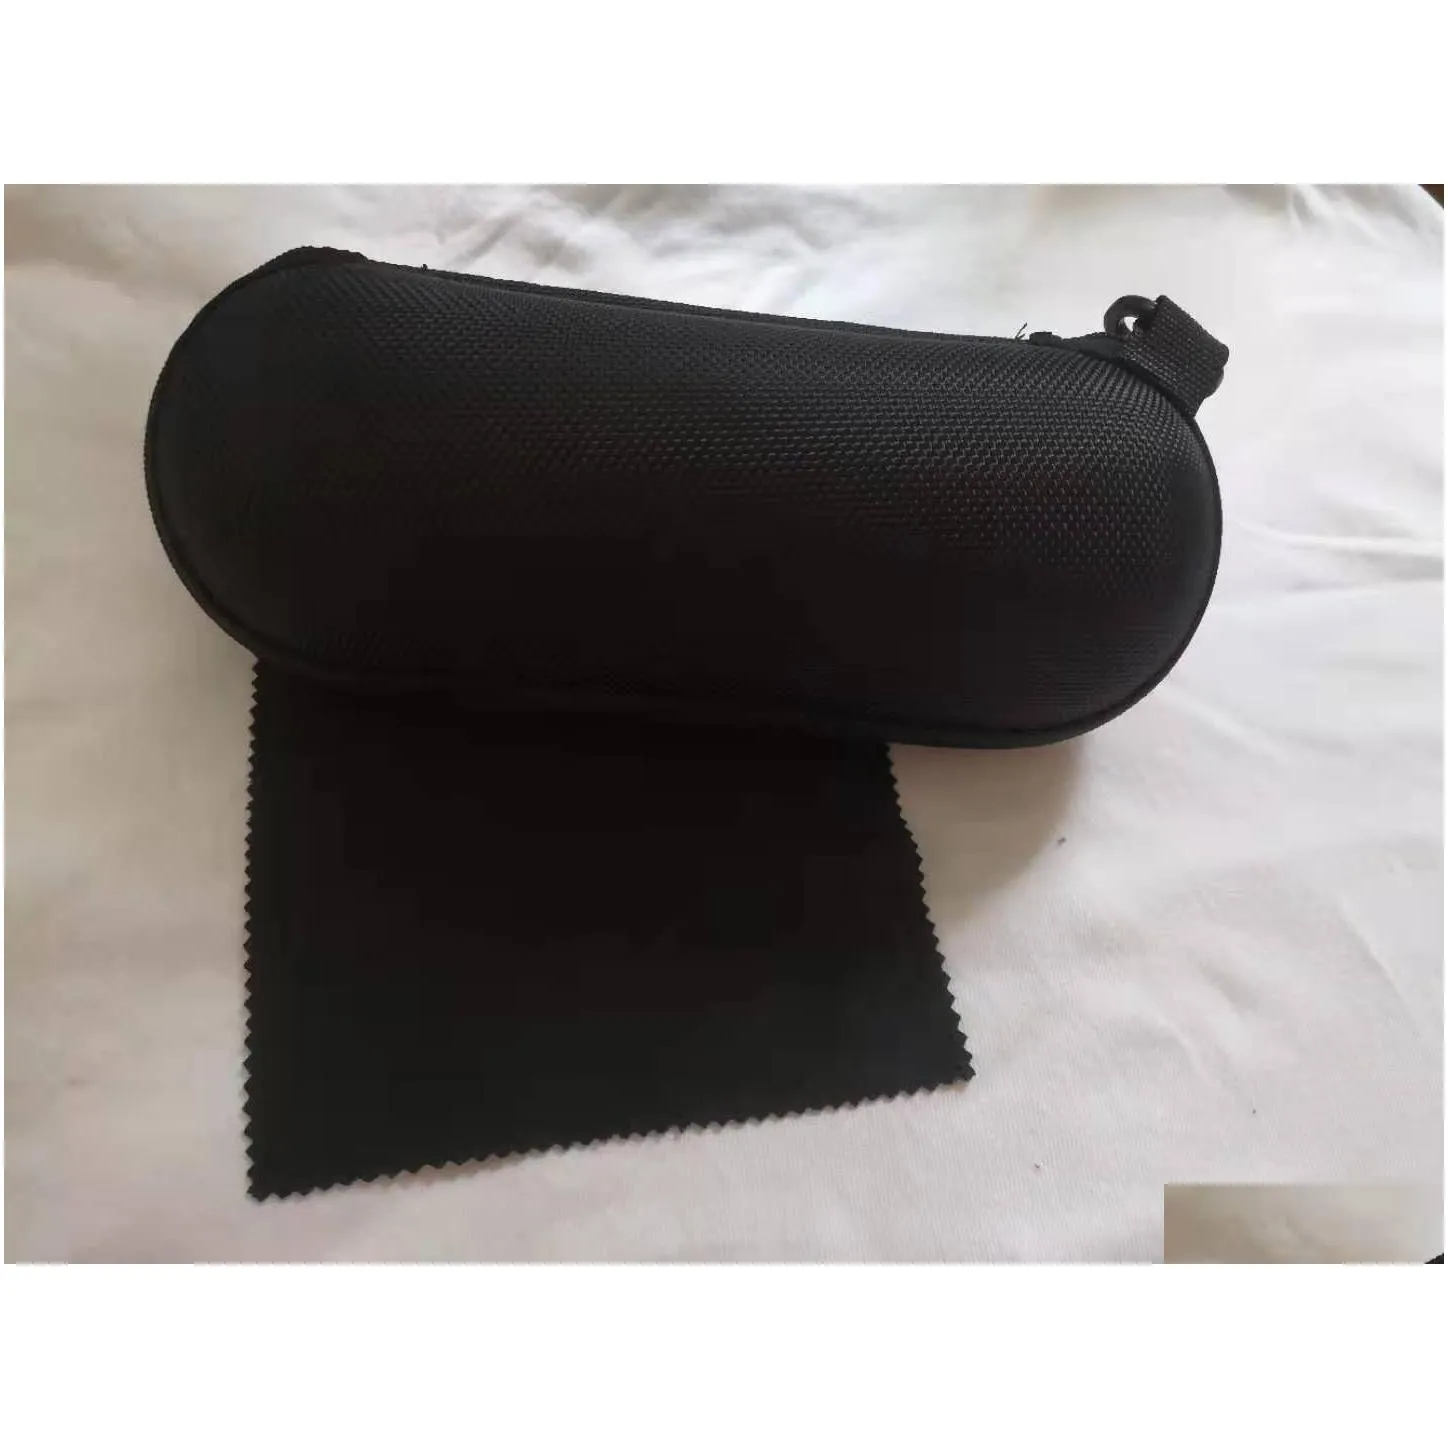 promotion black circle with cloth cover sunglasses case for women men glasses box with zipper eyewear cases eyewear accessories 10pcs